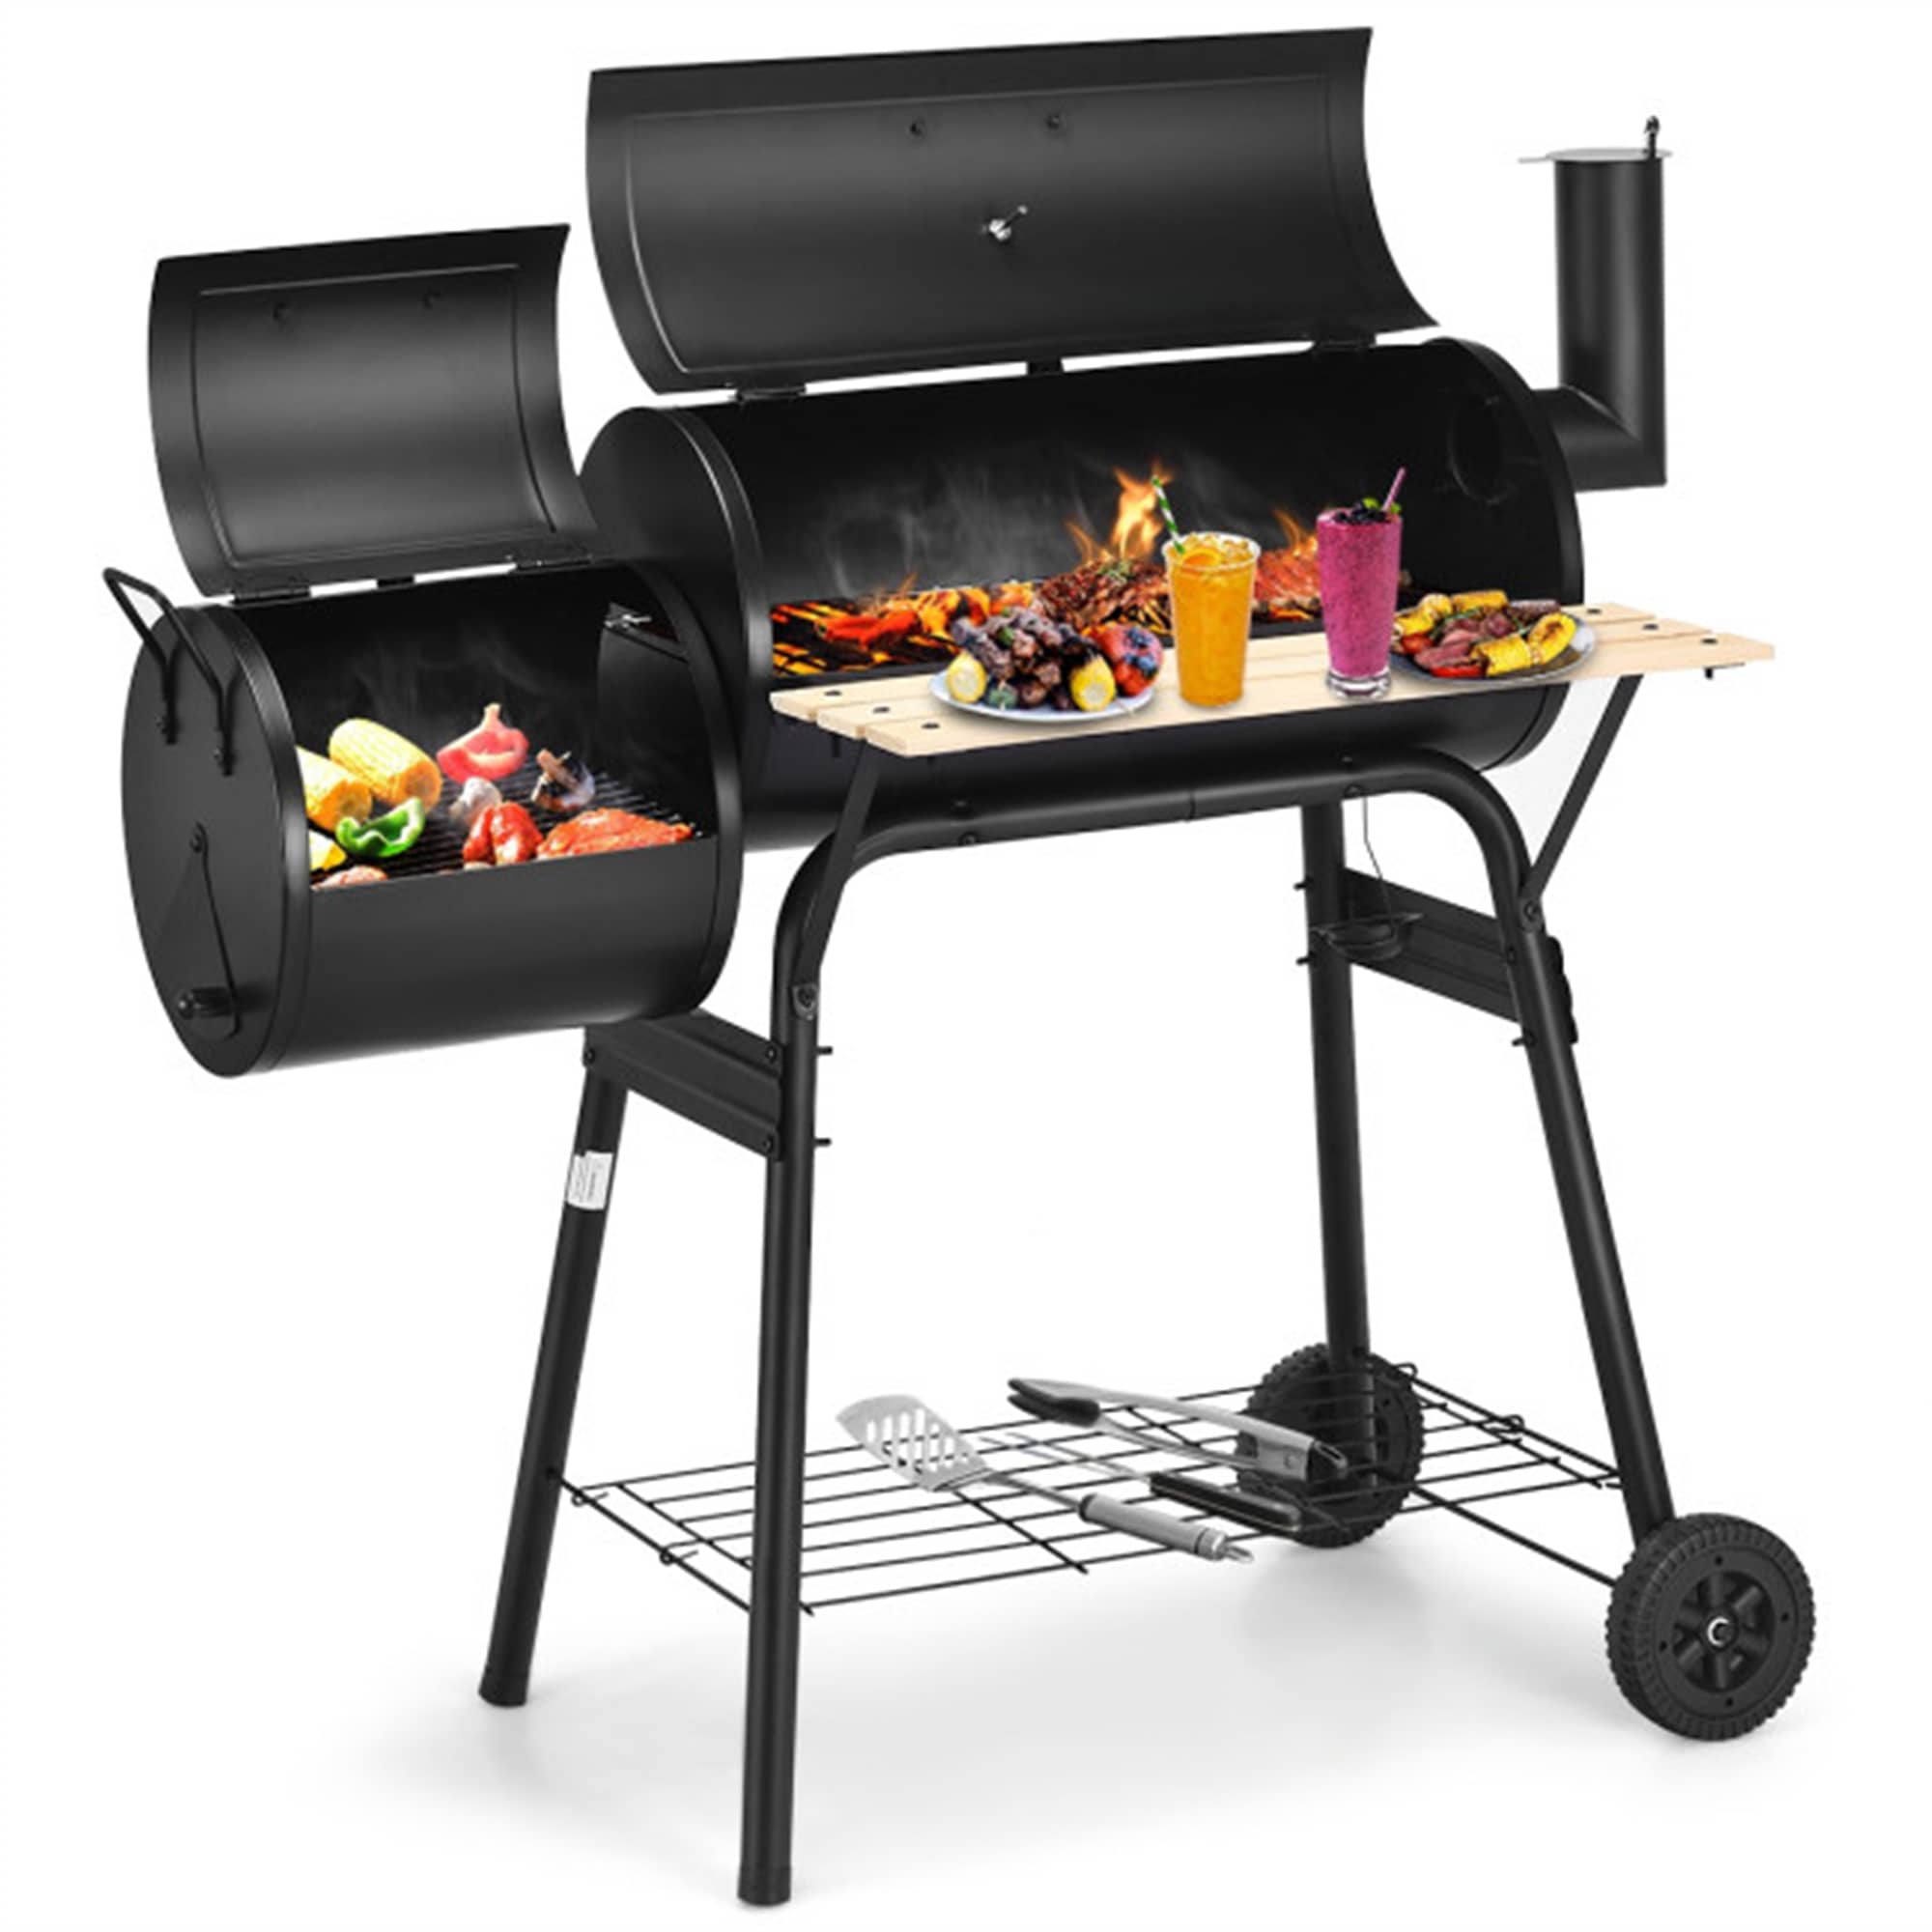 CASAINC Outdoor BBQ Grill Barbecue Pit Patio Cooker